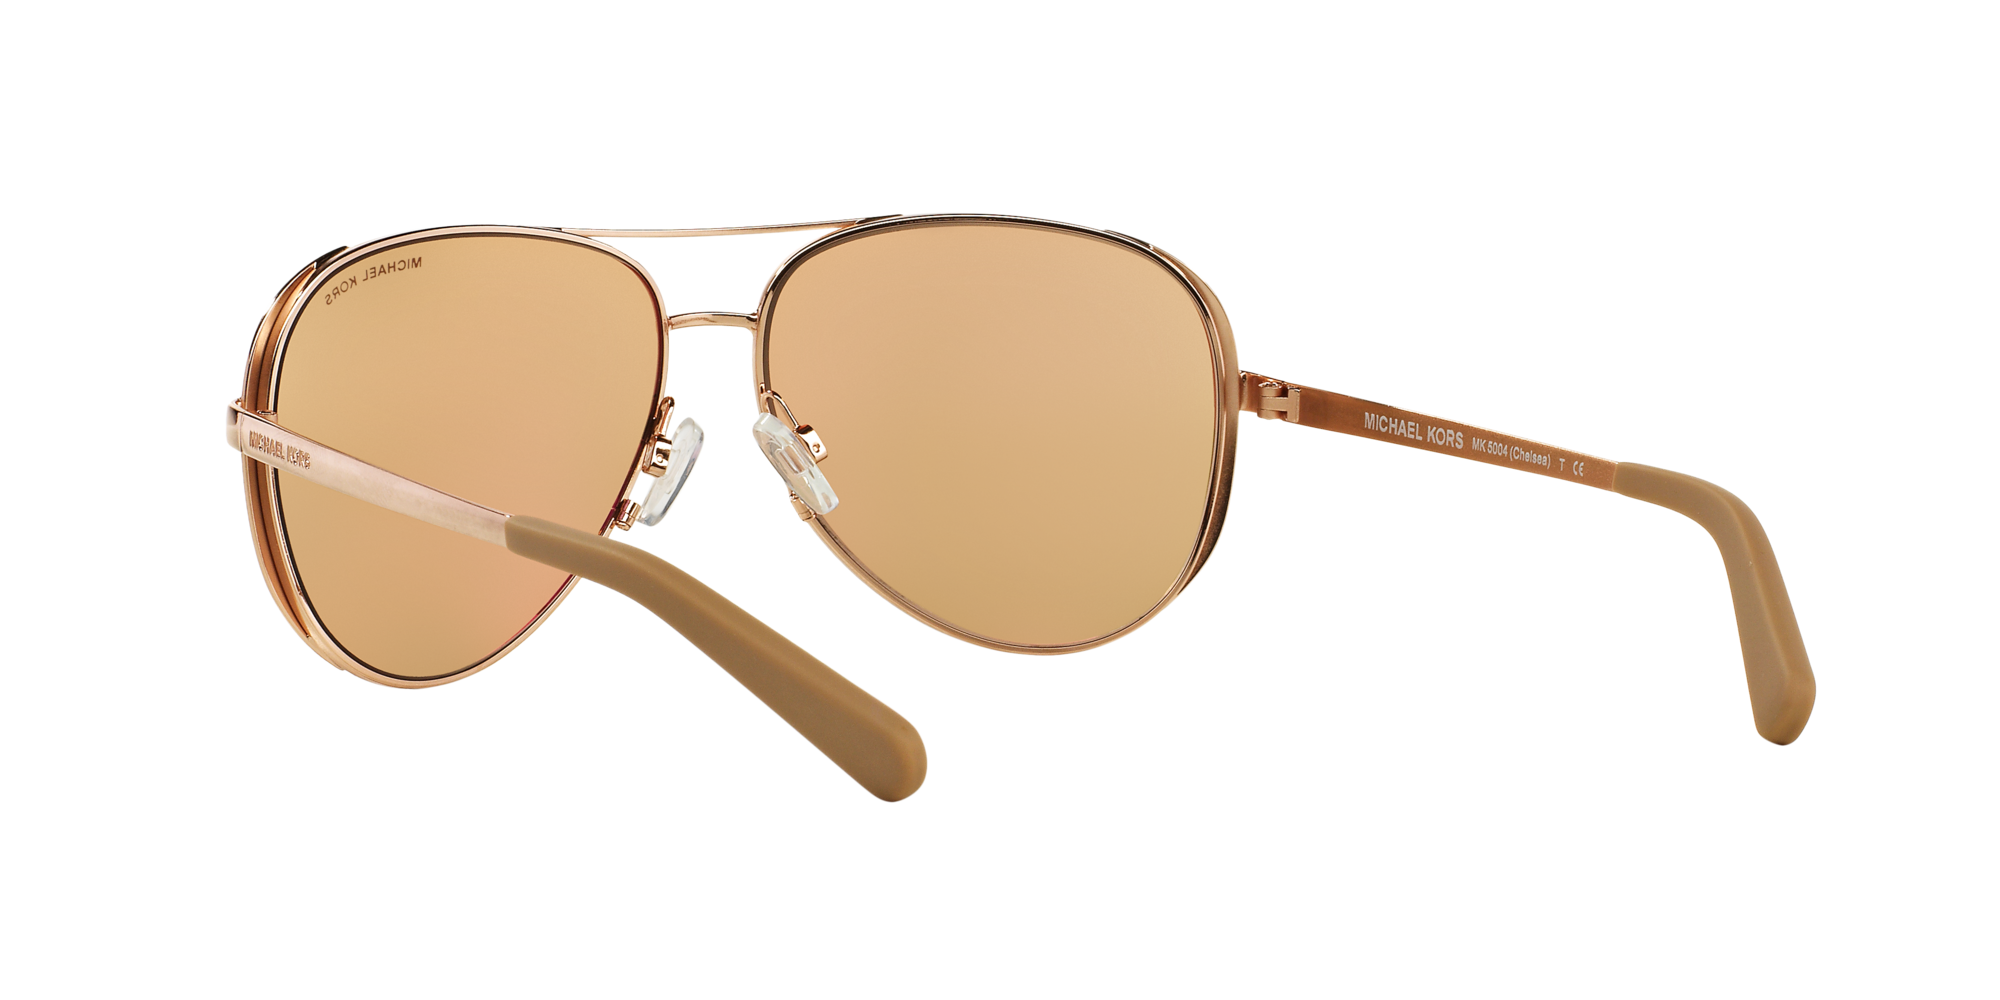 Michael Kors Sonnenbrille MK5004 1017R1 Chelsea rotgold/taupe